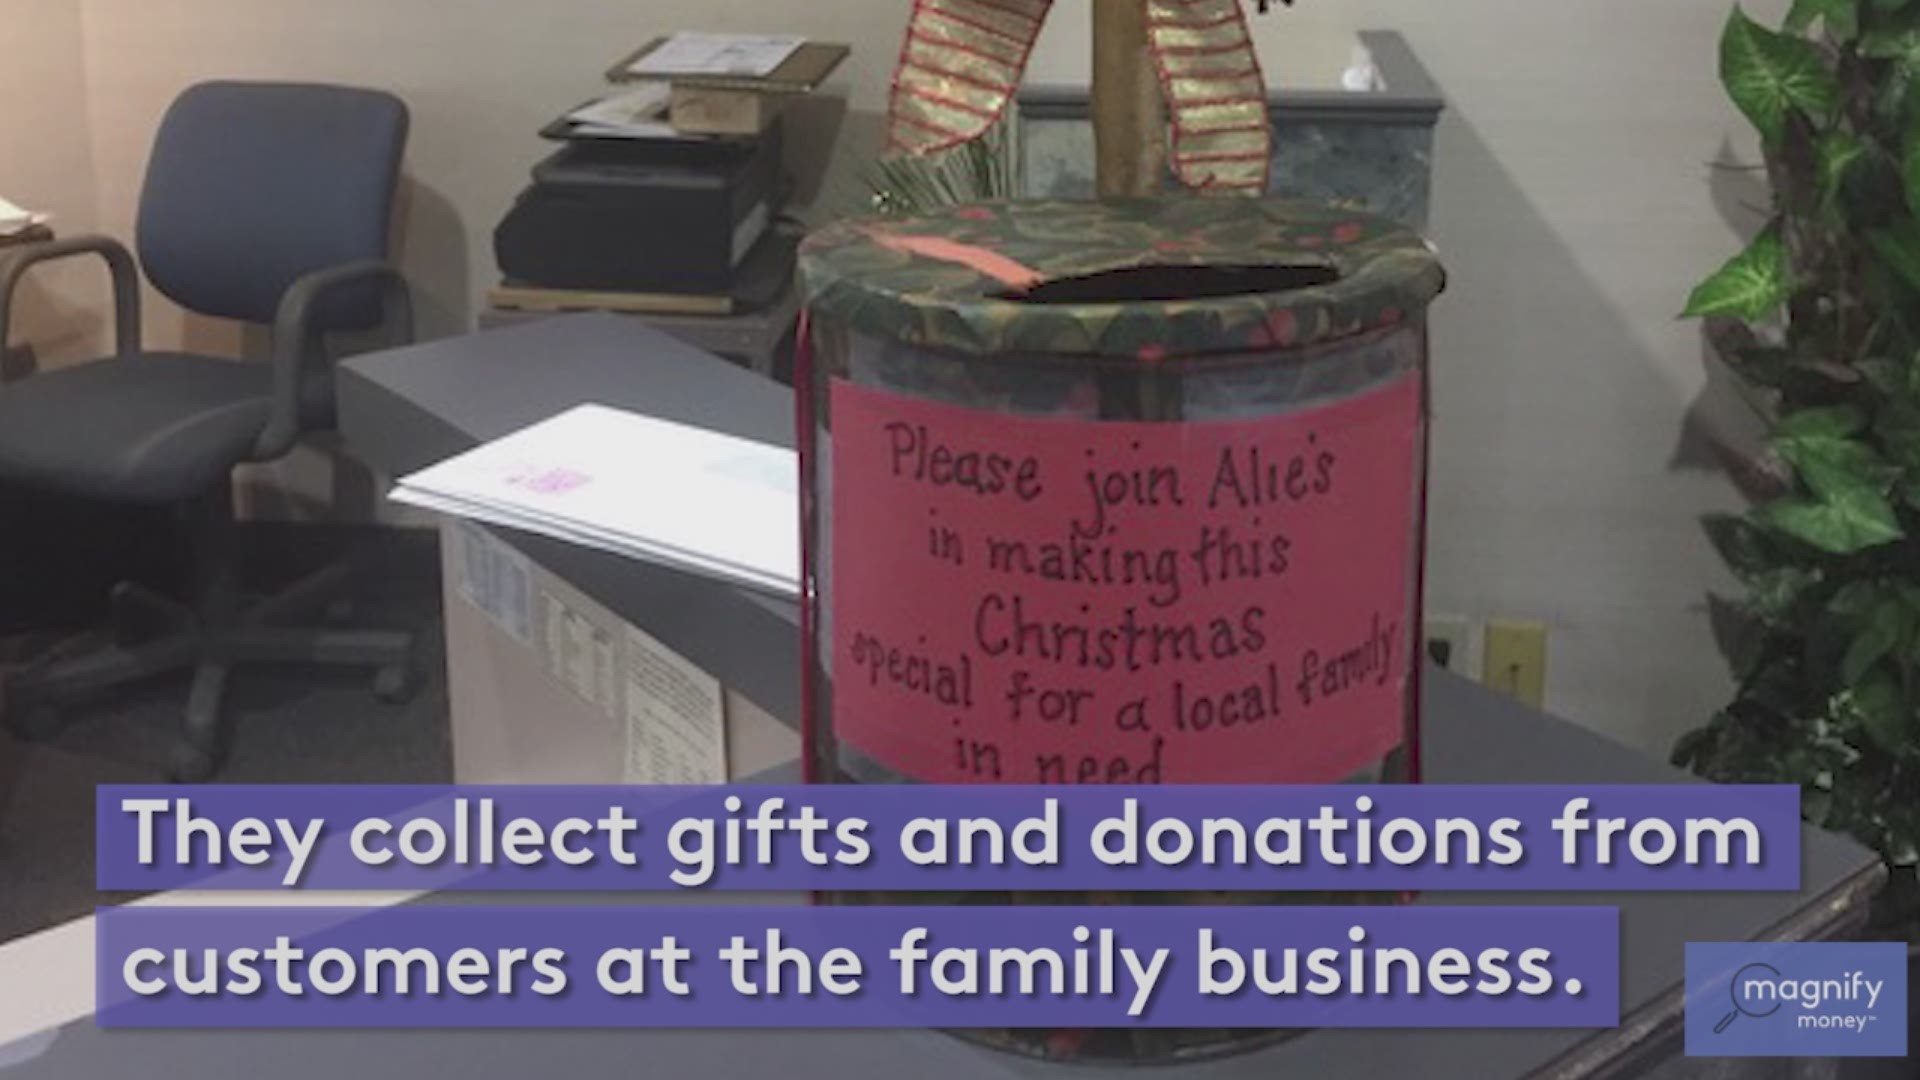 For the last two decades, this family has collectively raised tens thousands of dollars - between $800 and $1,200 each year - to sponsor a family for the holidays.